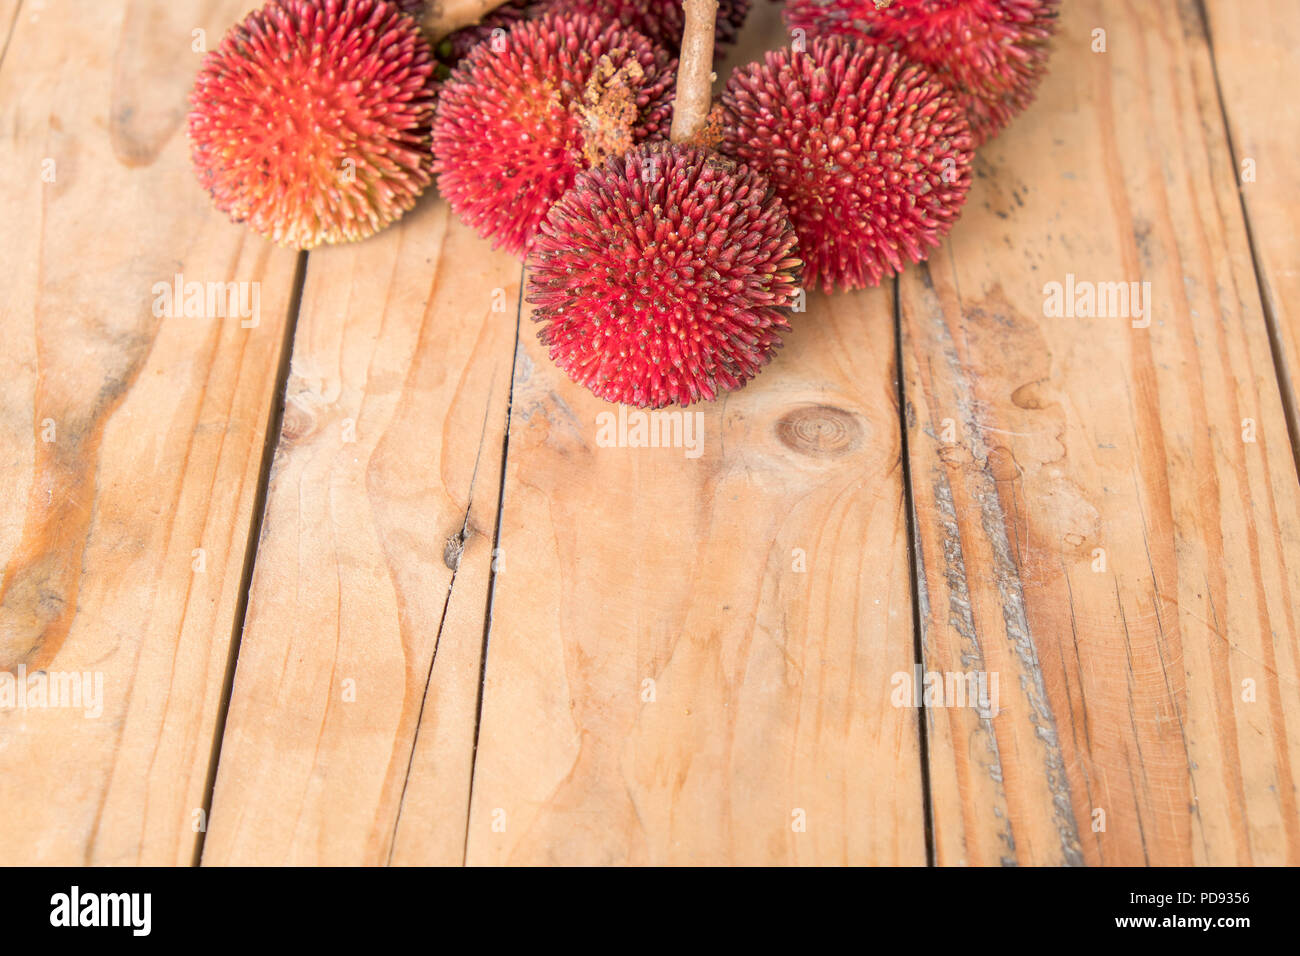 The pulasan, Nephelium mutabile Blume (family Sapindaceae), is a tropical fruit closely allied to the rambutan and sometimes confused with it on woode Stock Photo